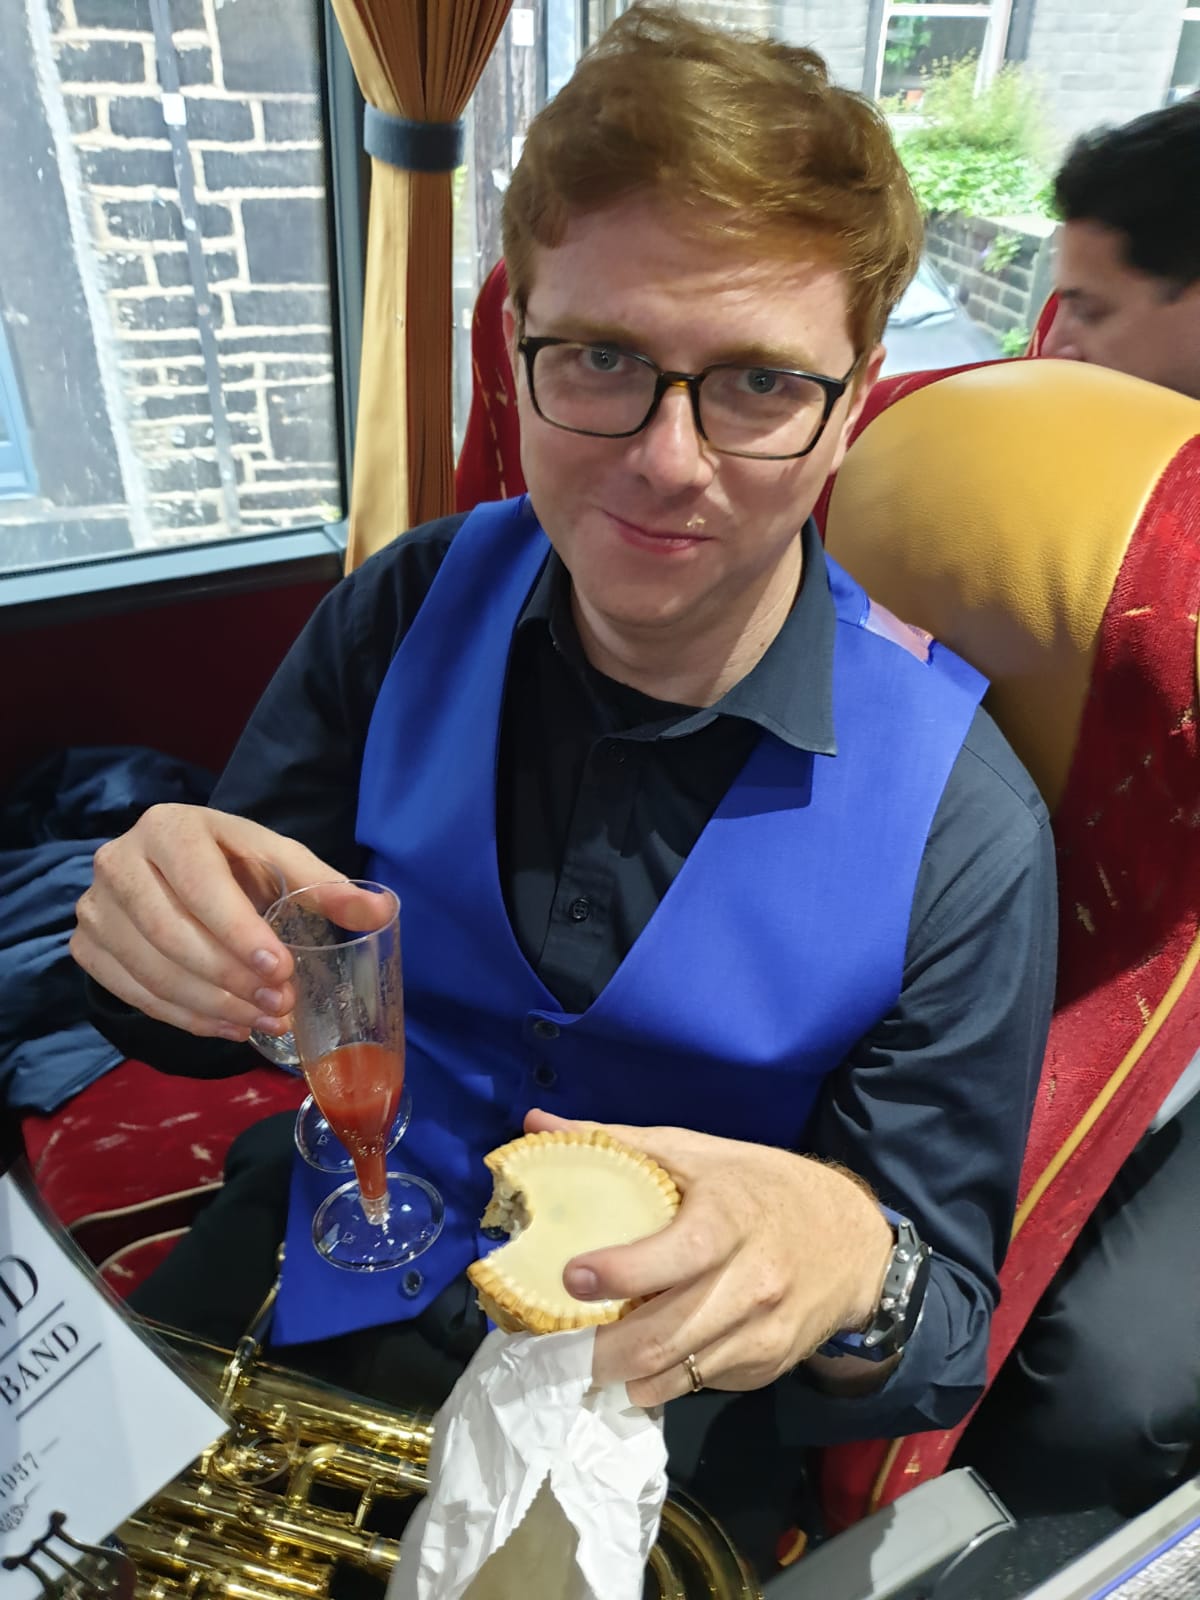 A player on the coach holding a champagne flute and a pork pie